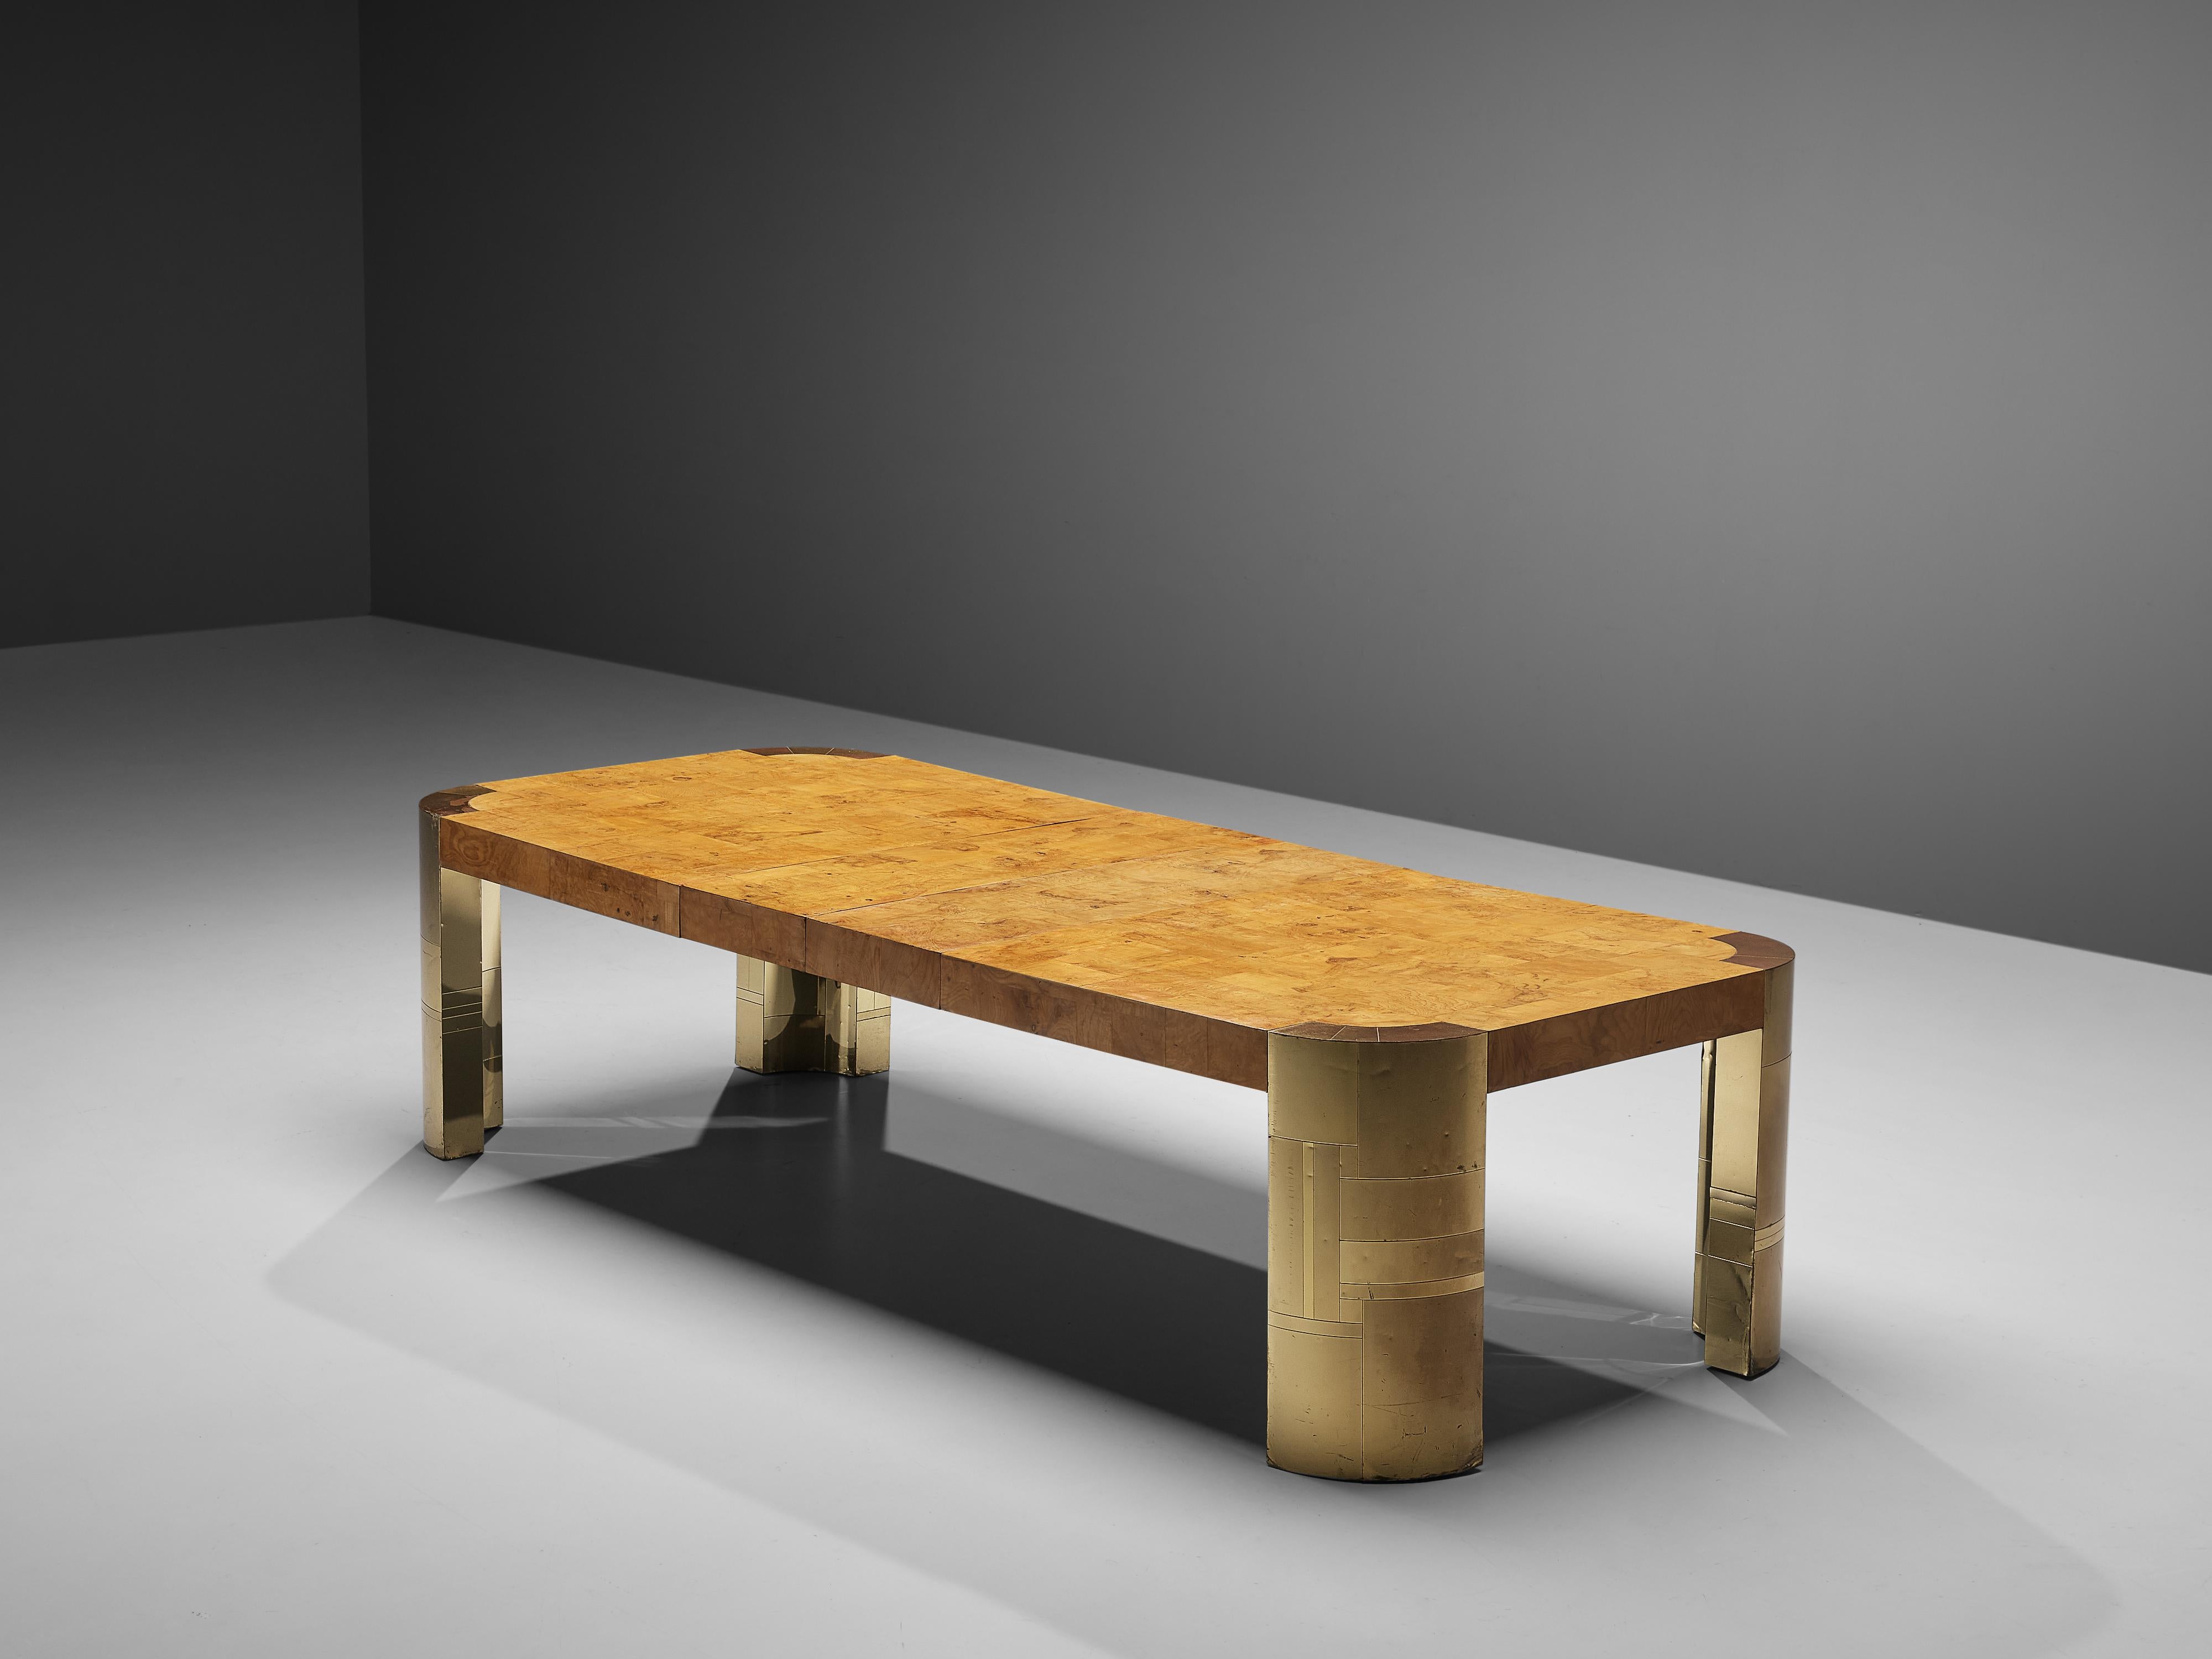 Paul Evans, extendable dining or conference table, wood burl, brass, United States, 1970s

Rare conference or large dining table by Paul Evans which comes with extension leaves. The long tabletop with rounded corners features an inlay of burl wood